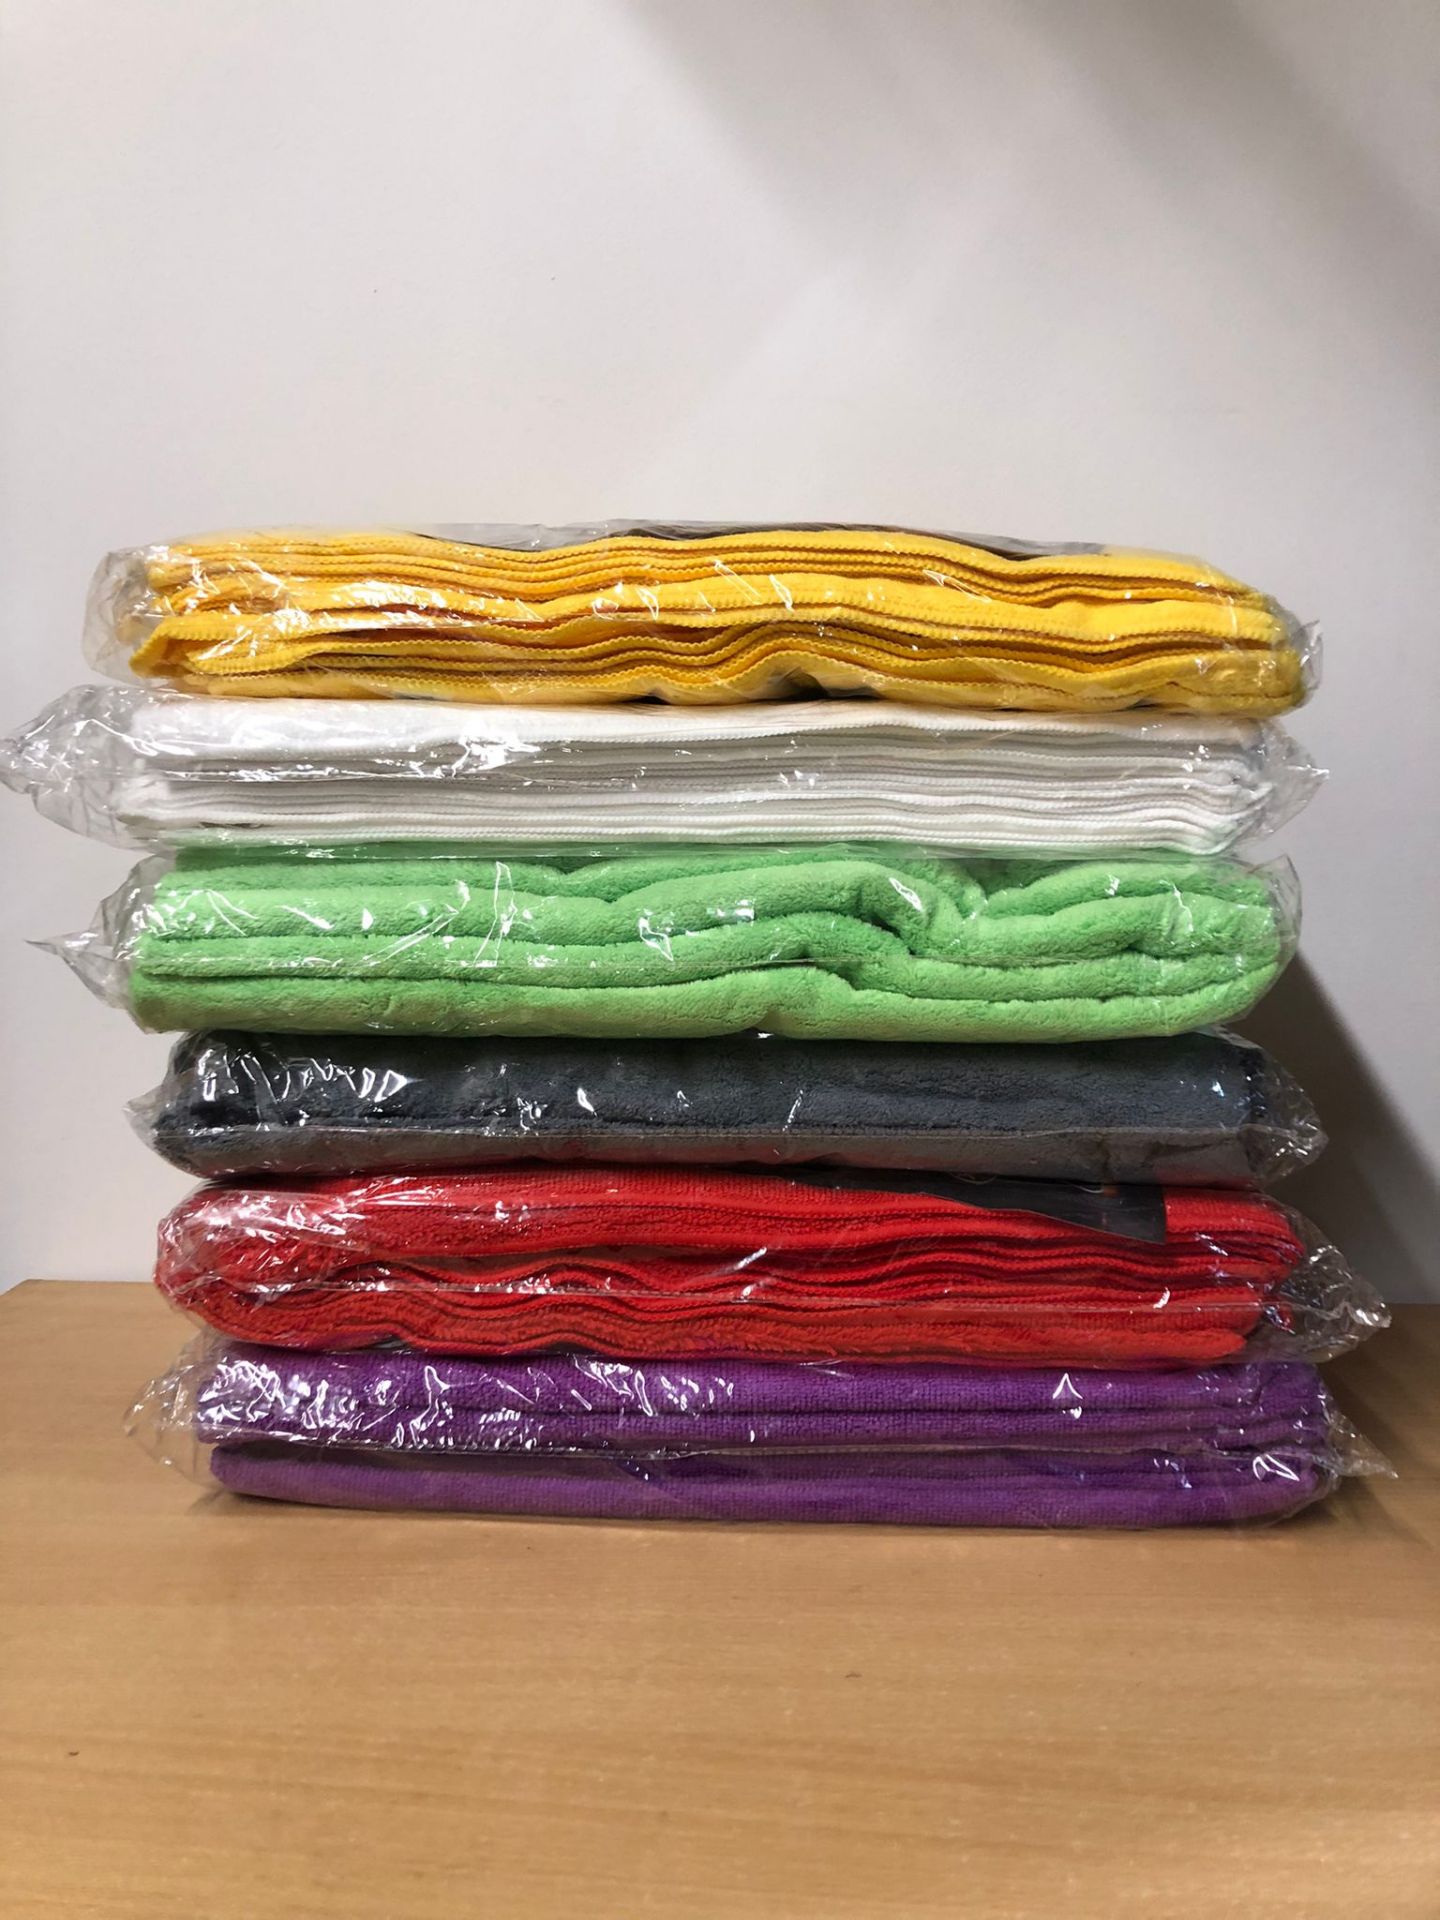 6 Packs of Detailing and Valeting Microfibre Cleaning Cloths Brand New - Image 8 of 9